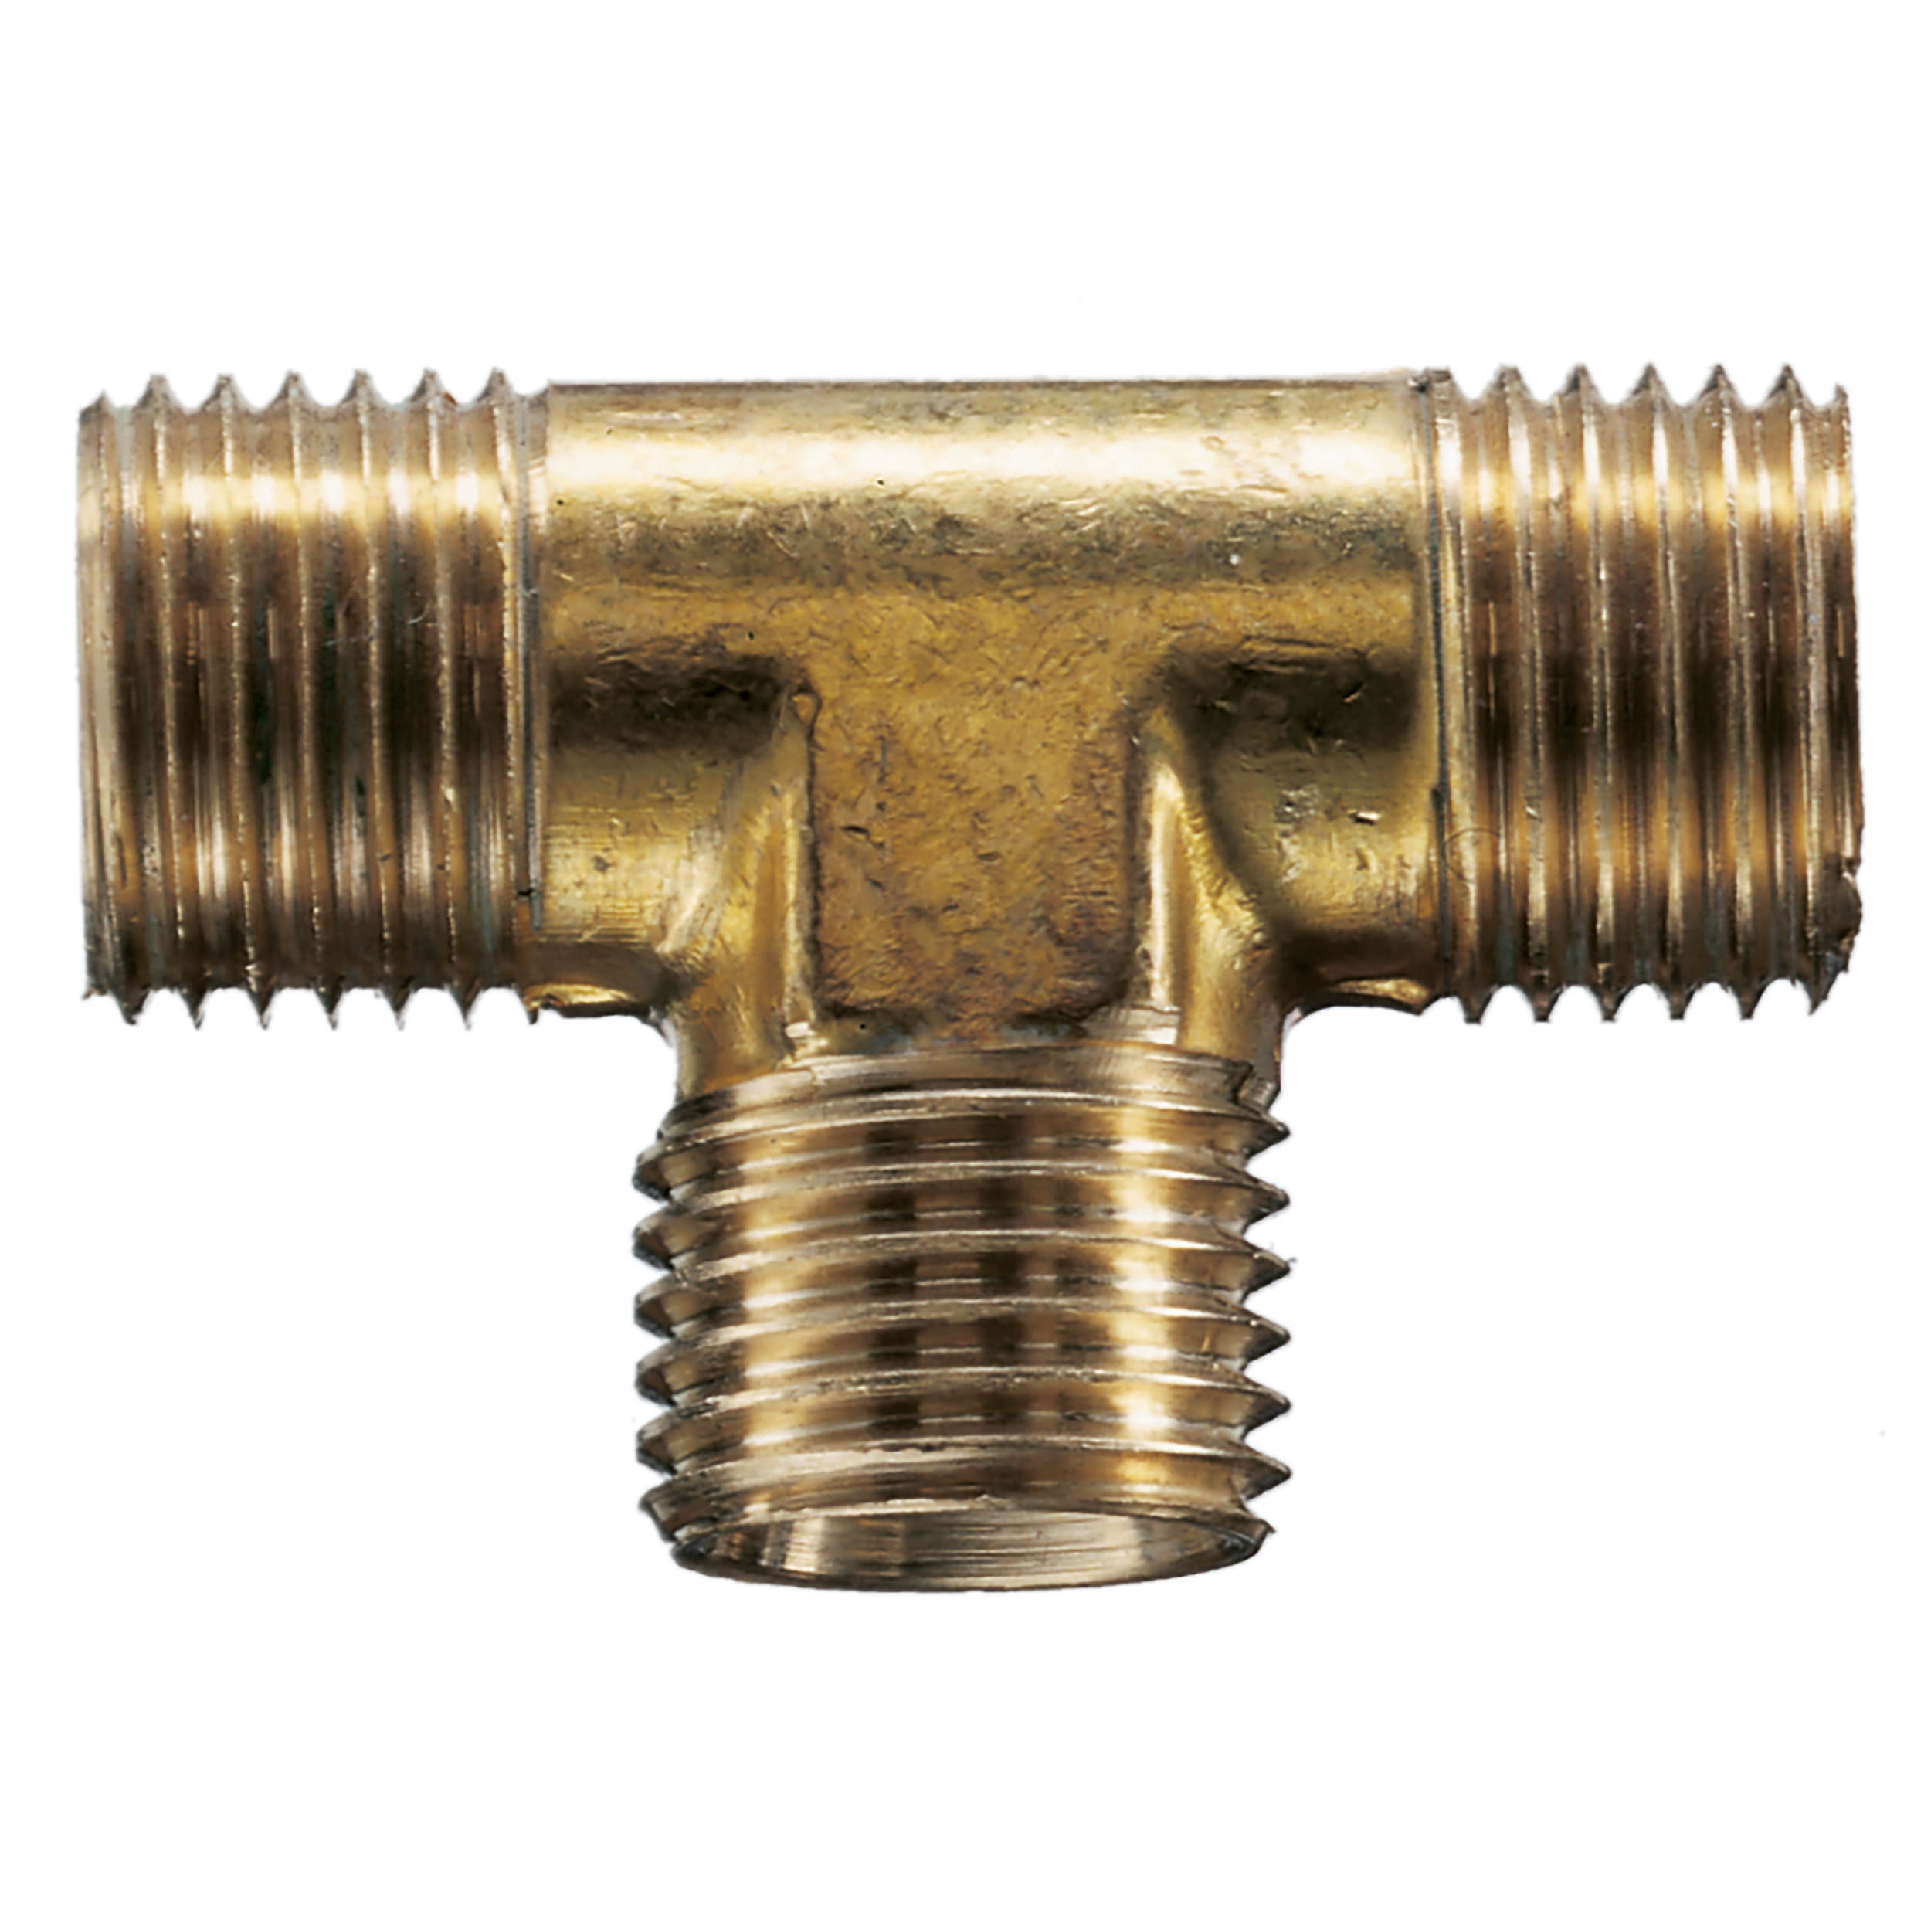 T-piece (brass), male thread and partial inner cone